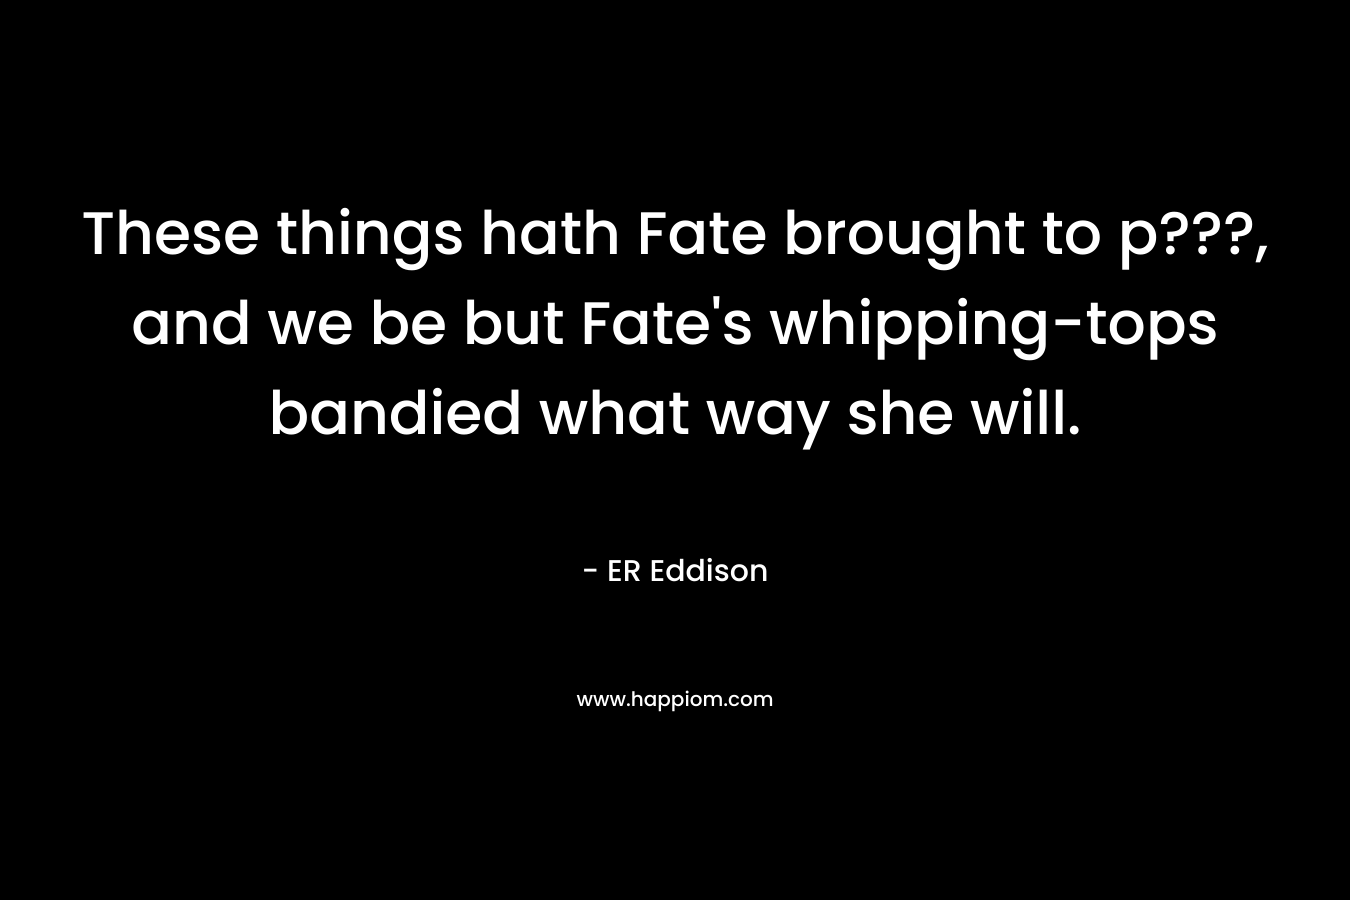 These things hath Fate brought to p???, and we be but Fate’s whipping-tops bandied what way she will. – ER Eddison